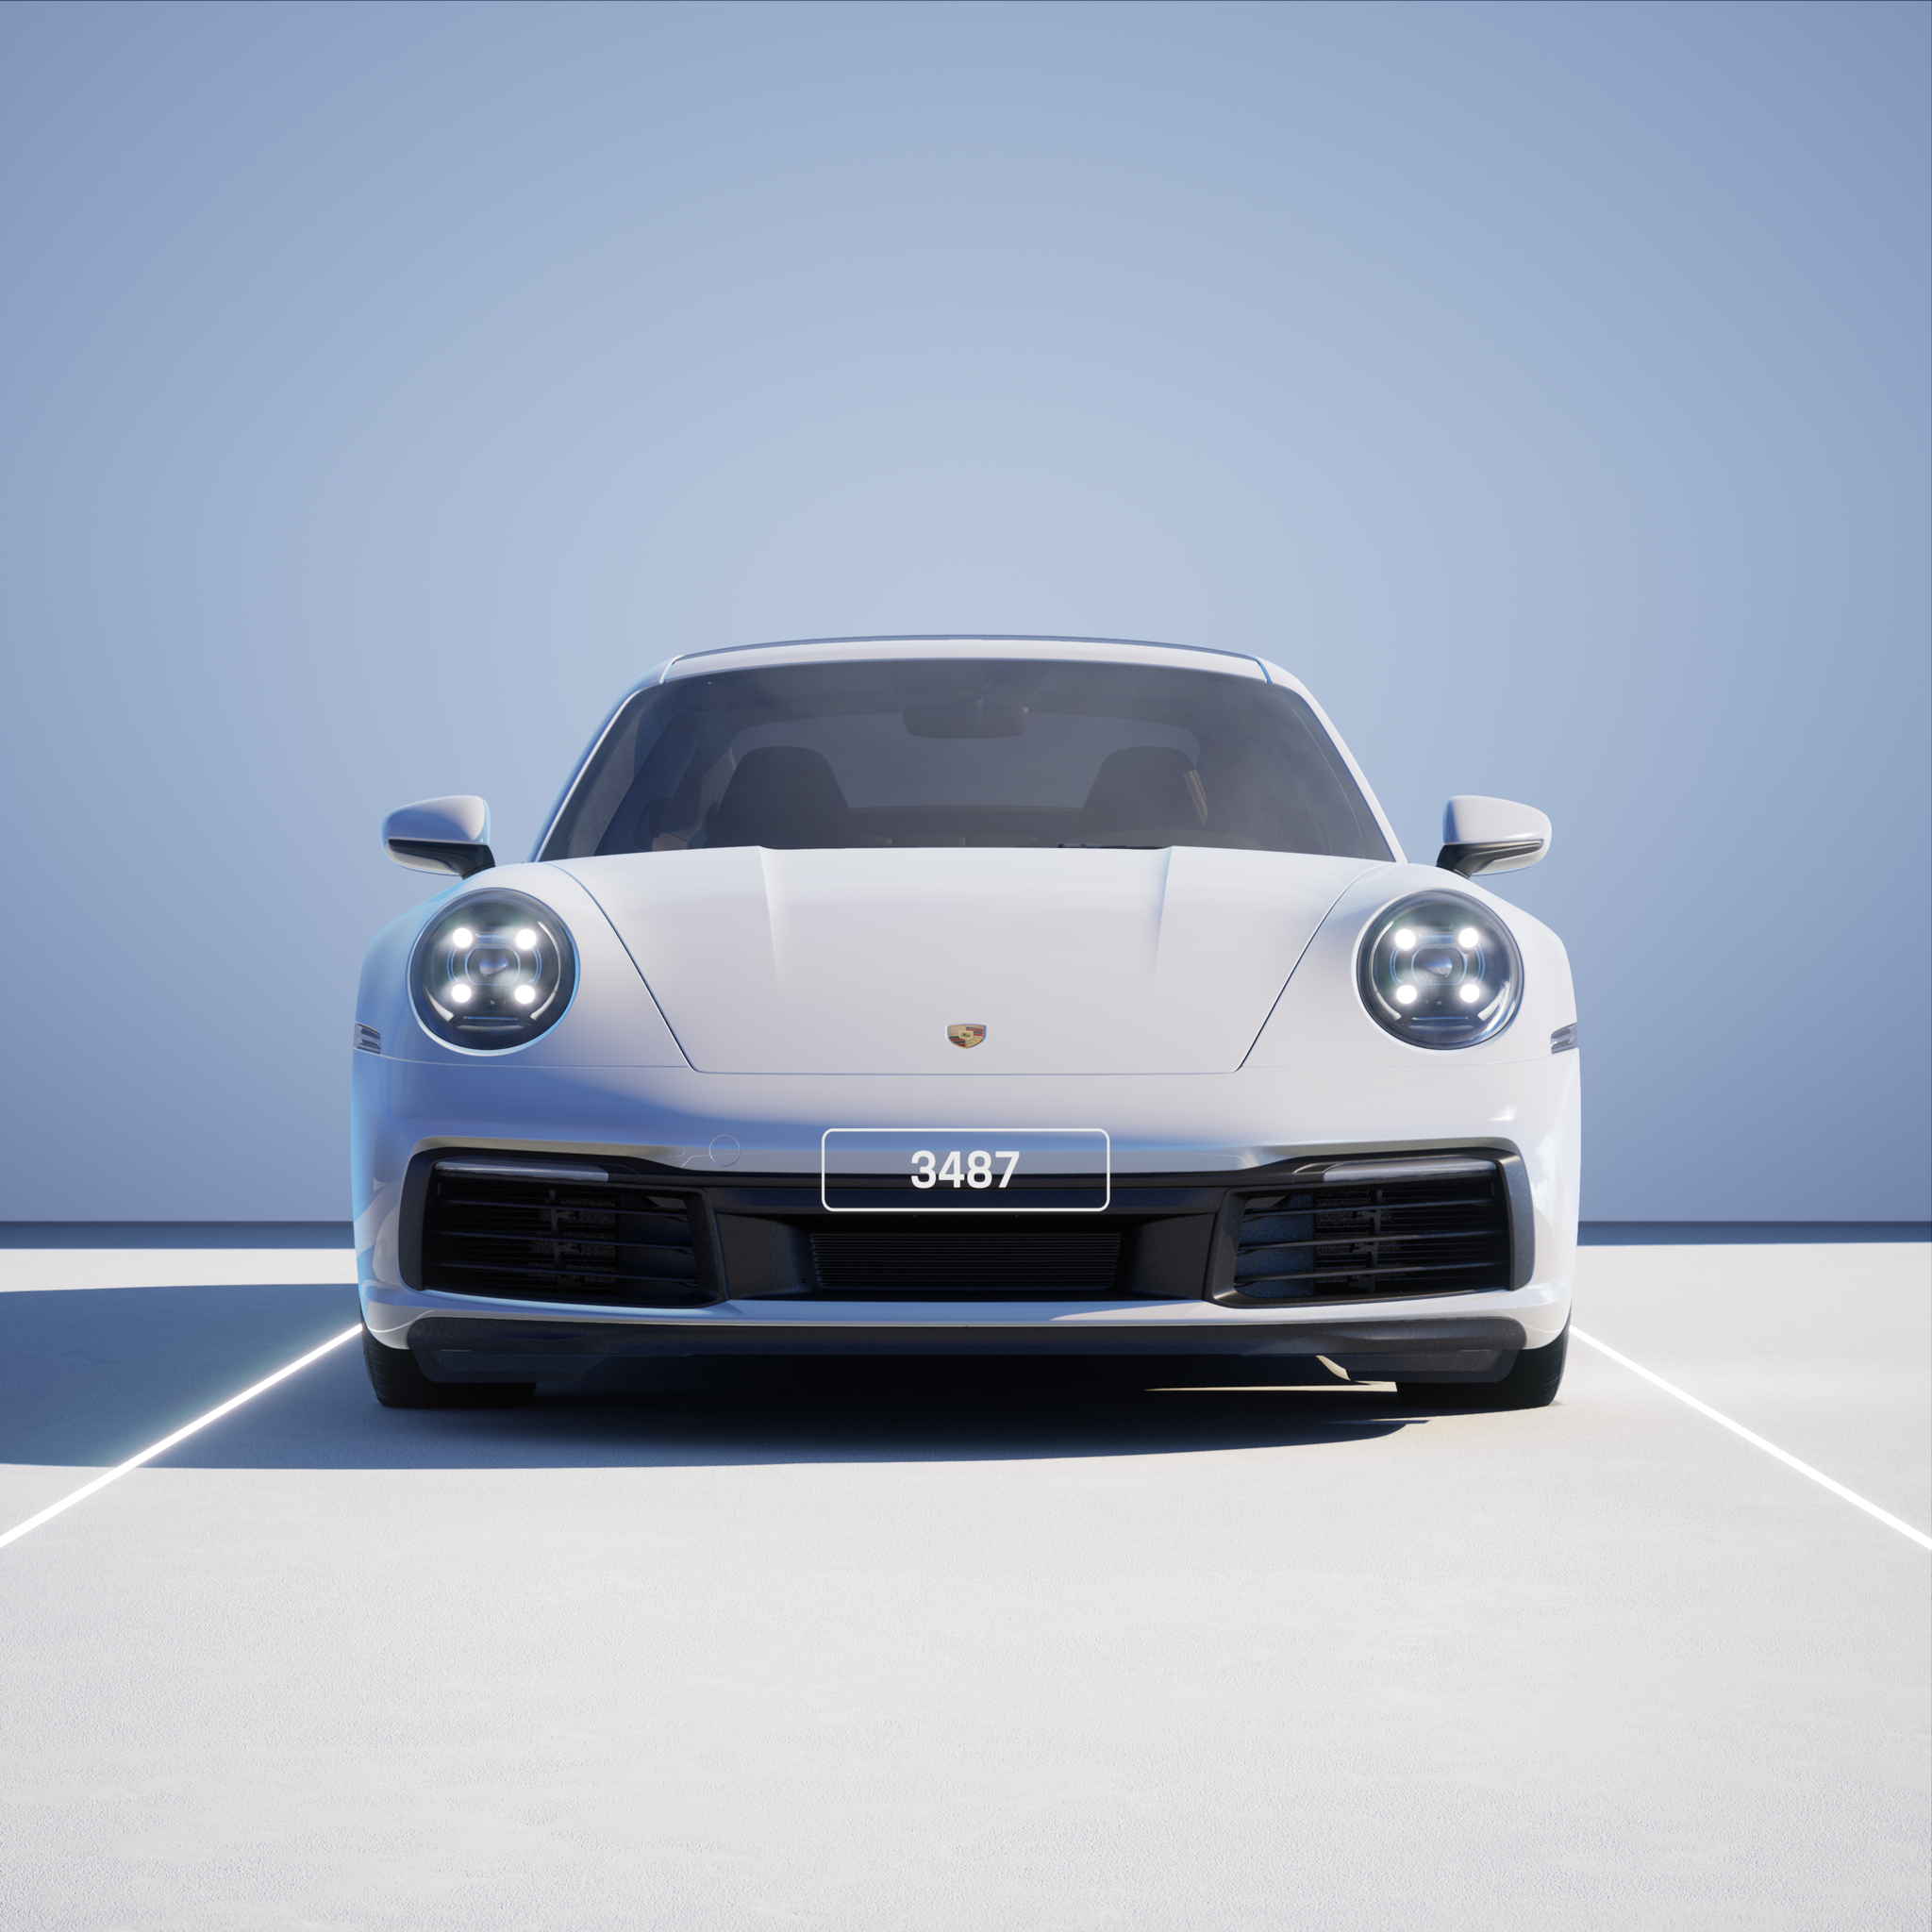 The PORSCHΞ 911 3487 image in phase